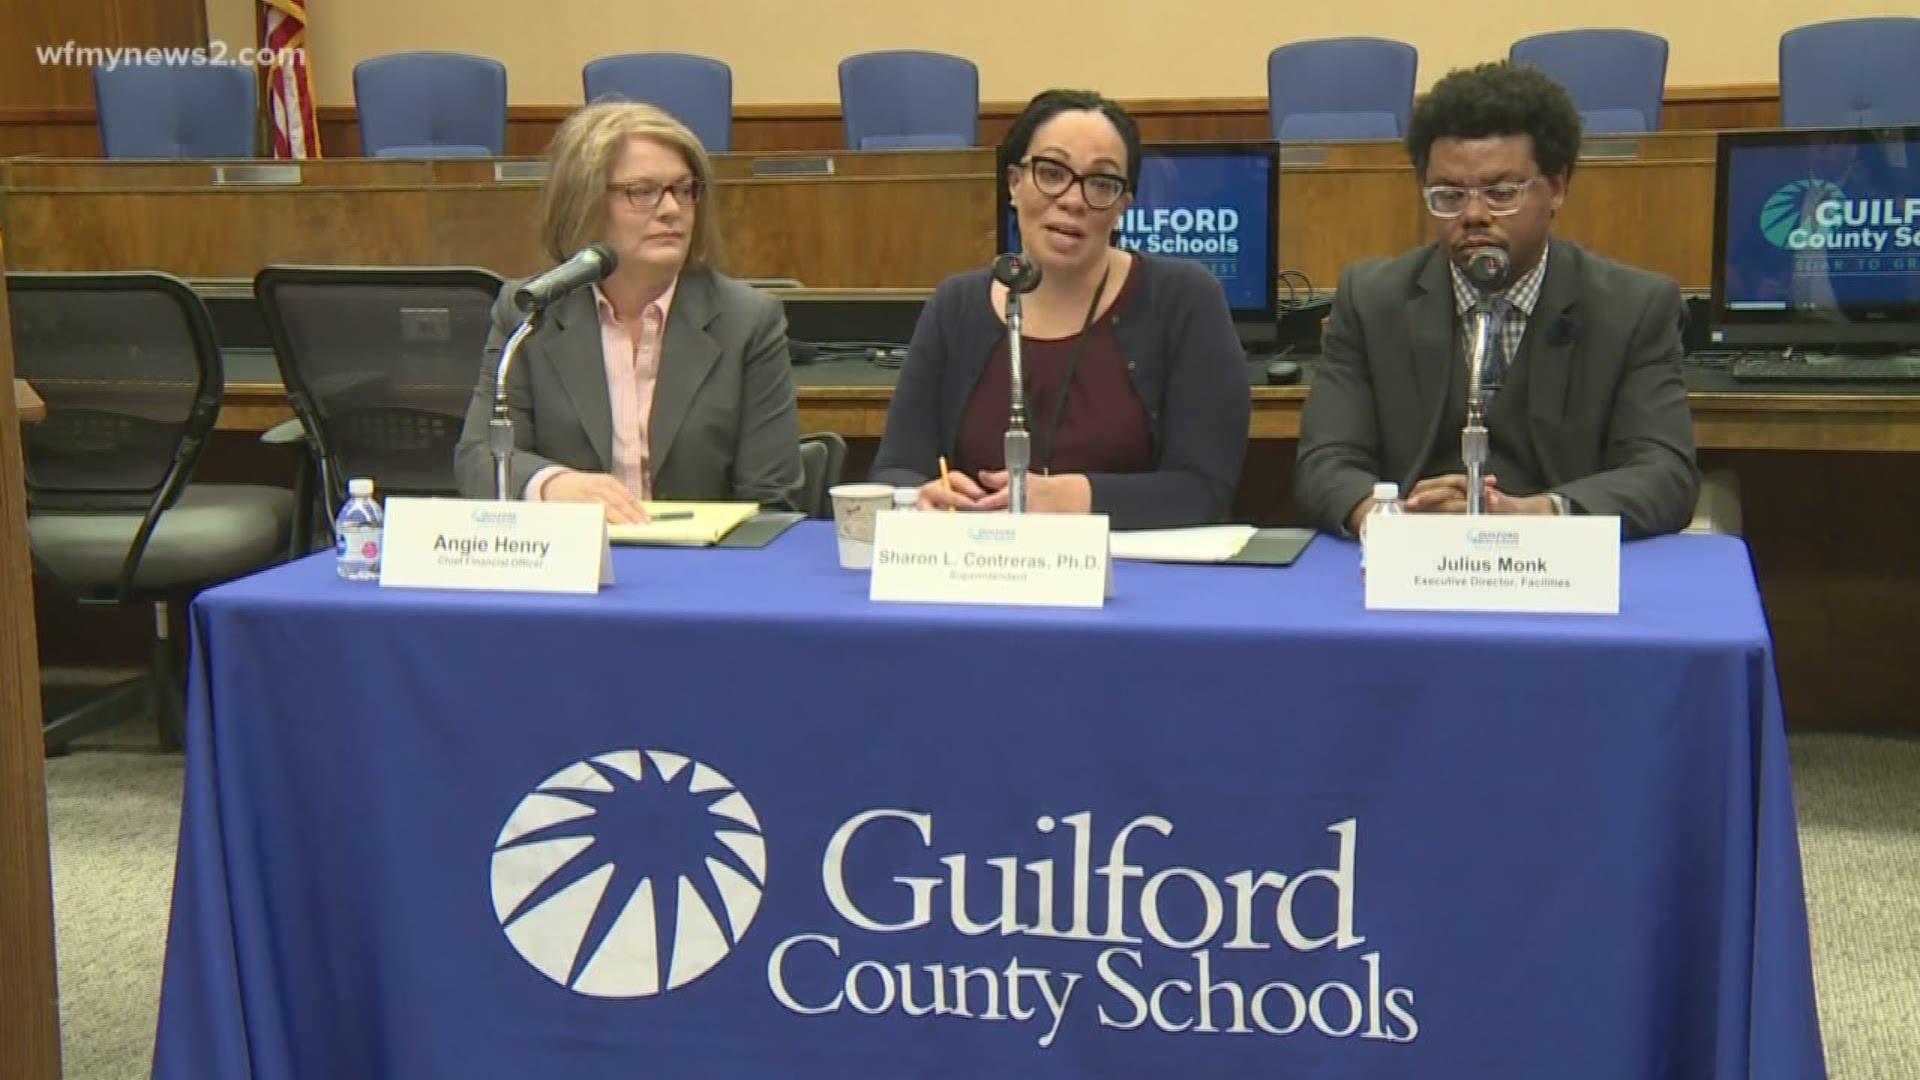 Yesterday, Guilford County Schools superintendent Doctor Sharon Contreras talked before congress about what needs to be done to fix the problems.